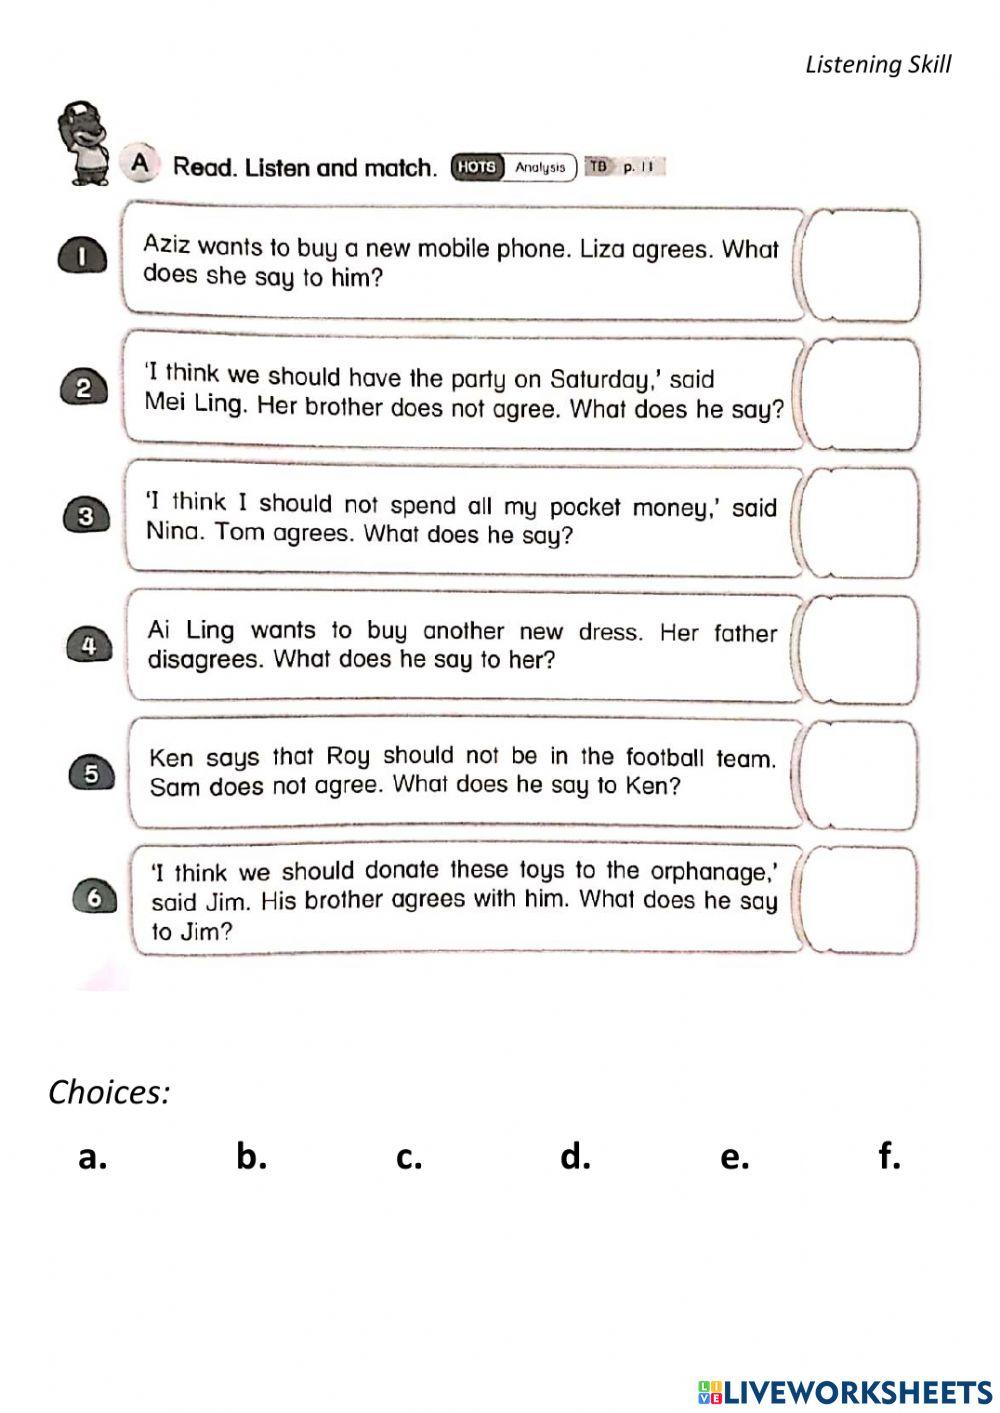 Year 6-AB-page 7-Read, listen and match